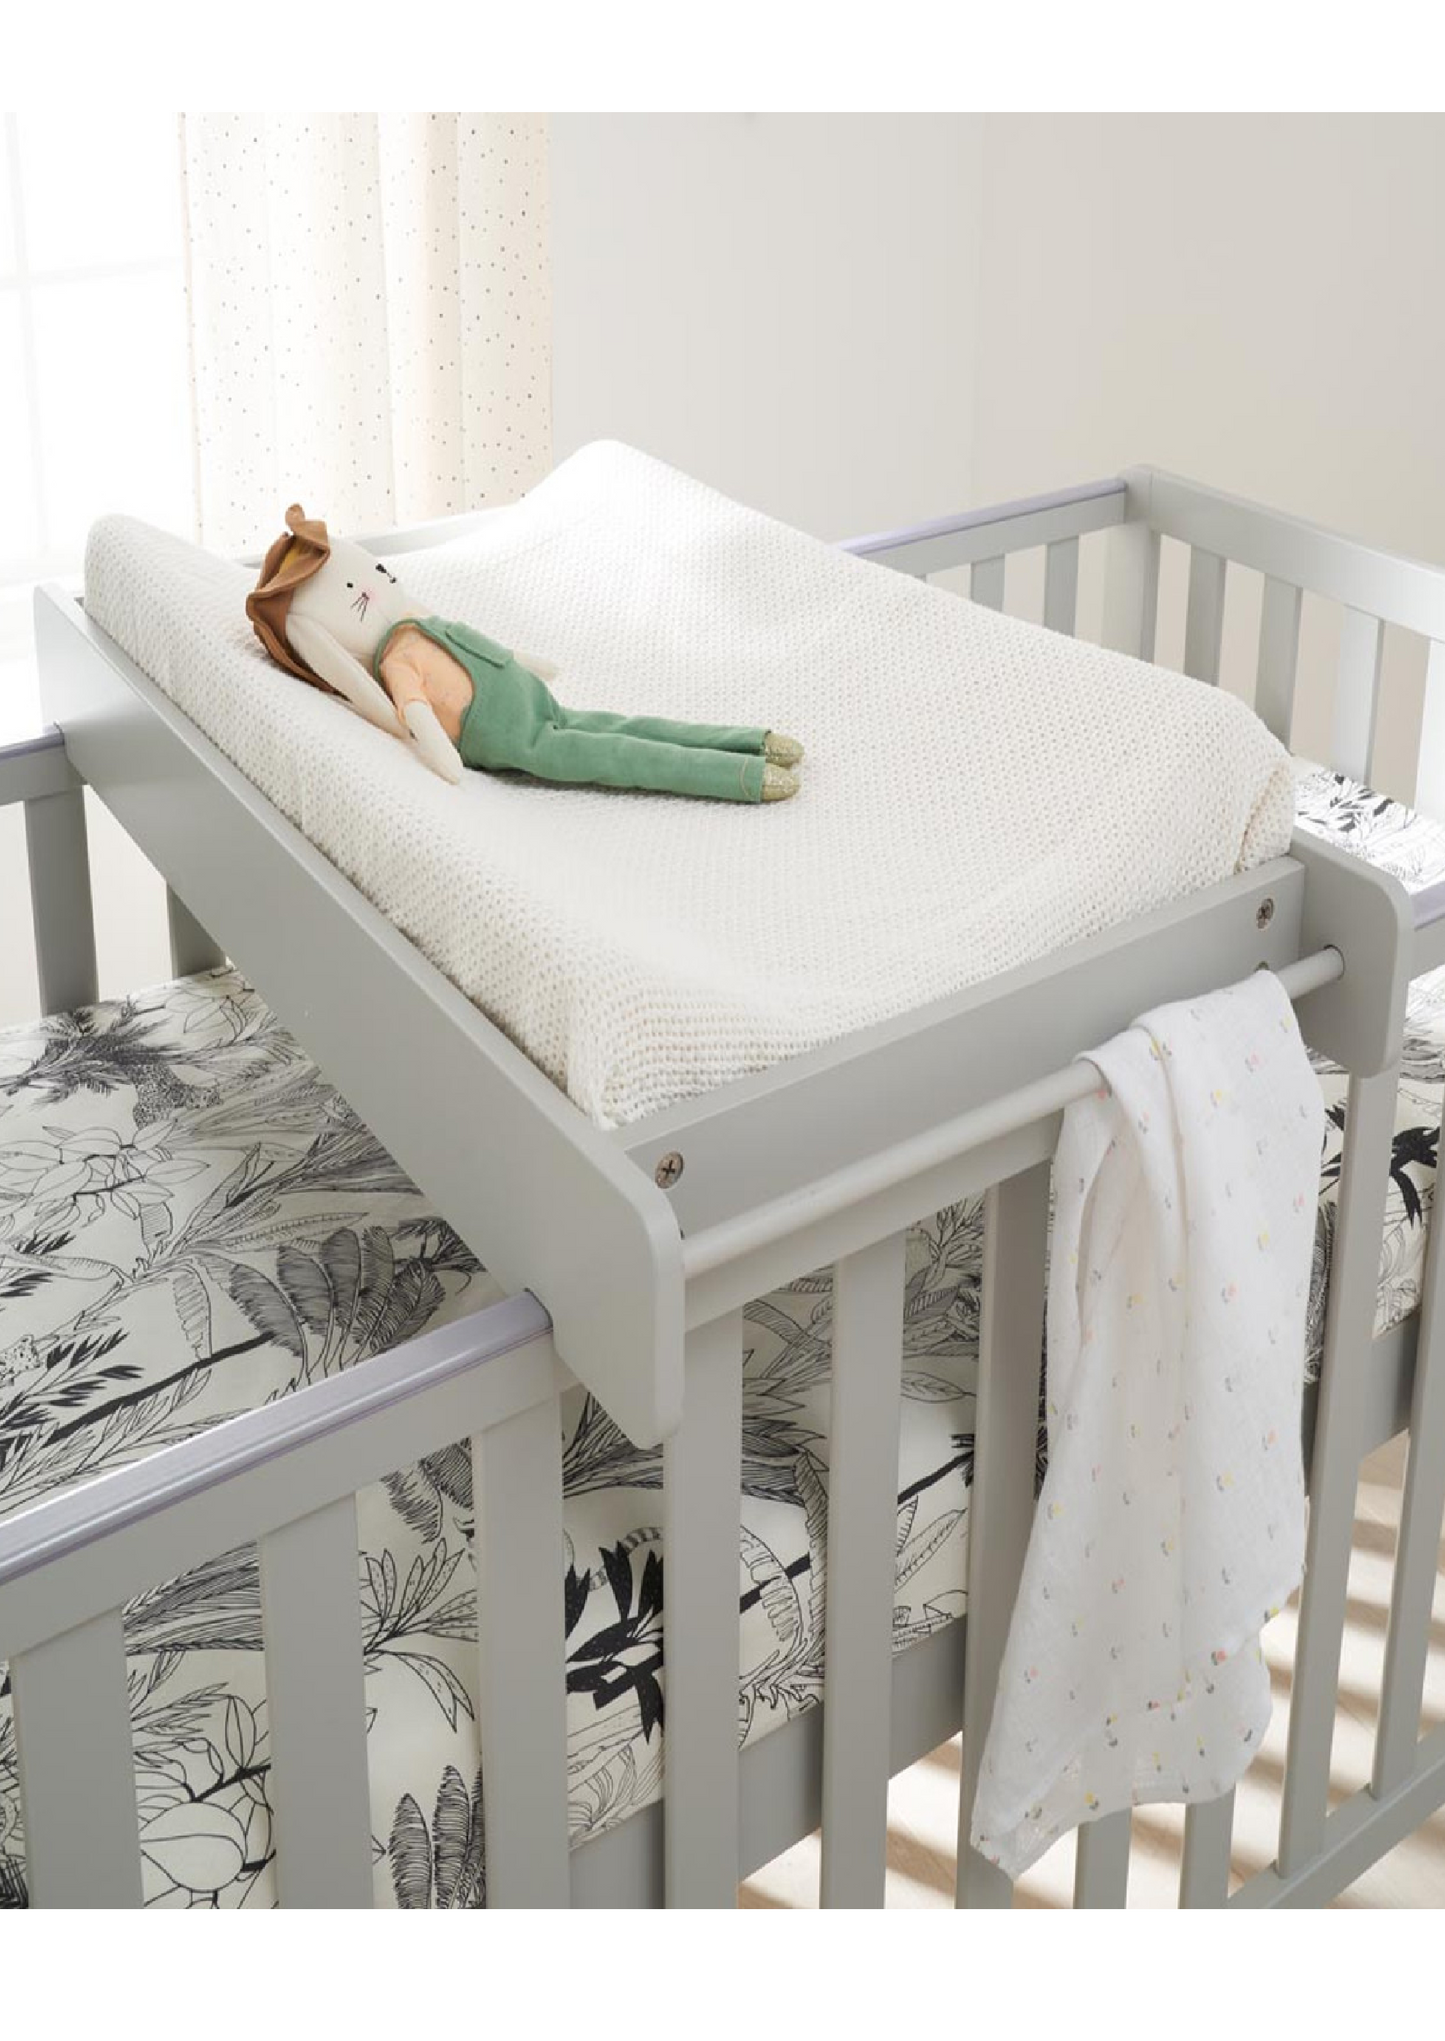 Tutti Bambini Malmo Cot Bed with Cot Top Changer & Mattress